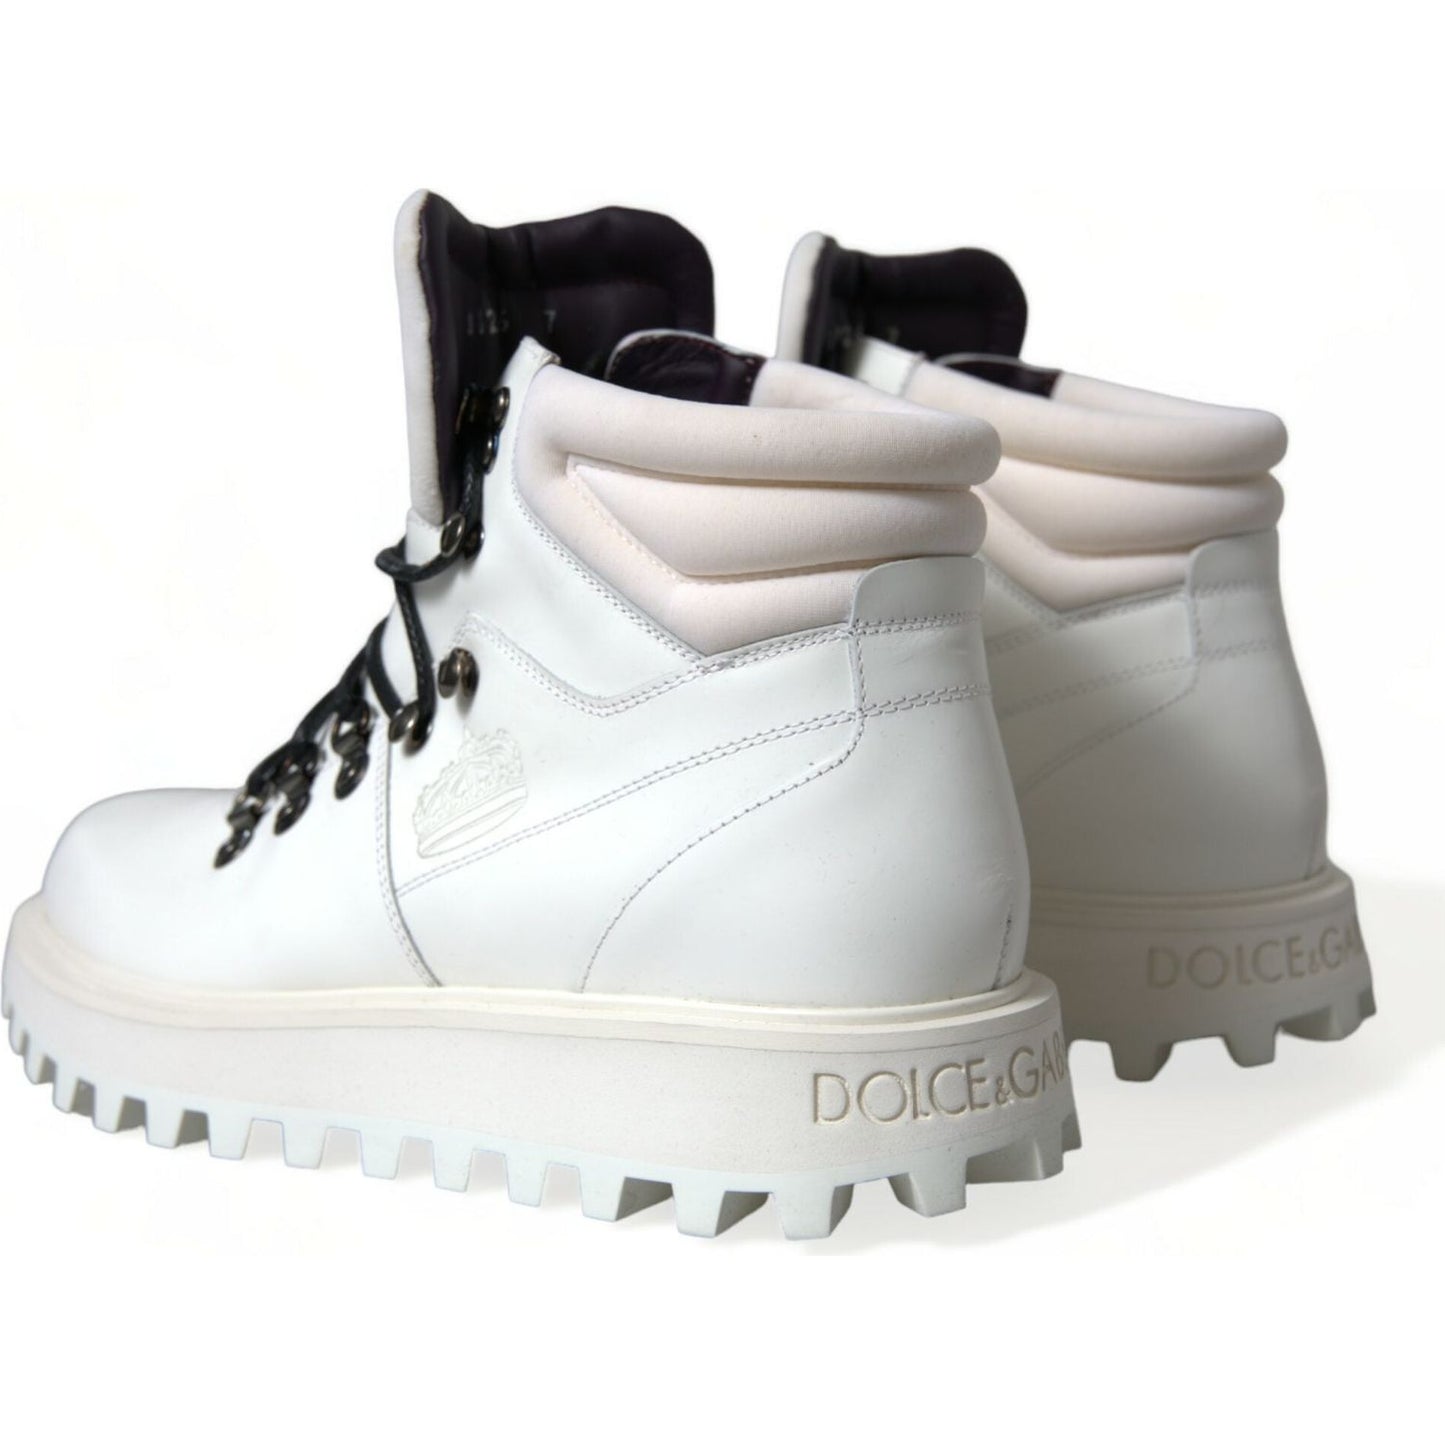 Dolce & Gabbana Elegant White Leather Ankle Boots white-vulcano-trekking-ankle-boots-shoes